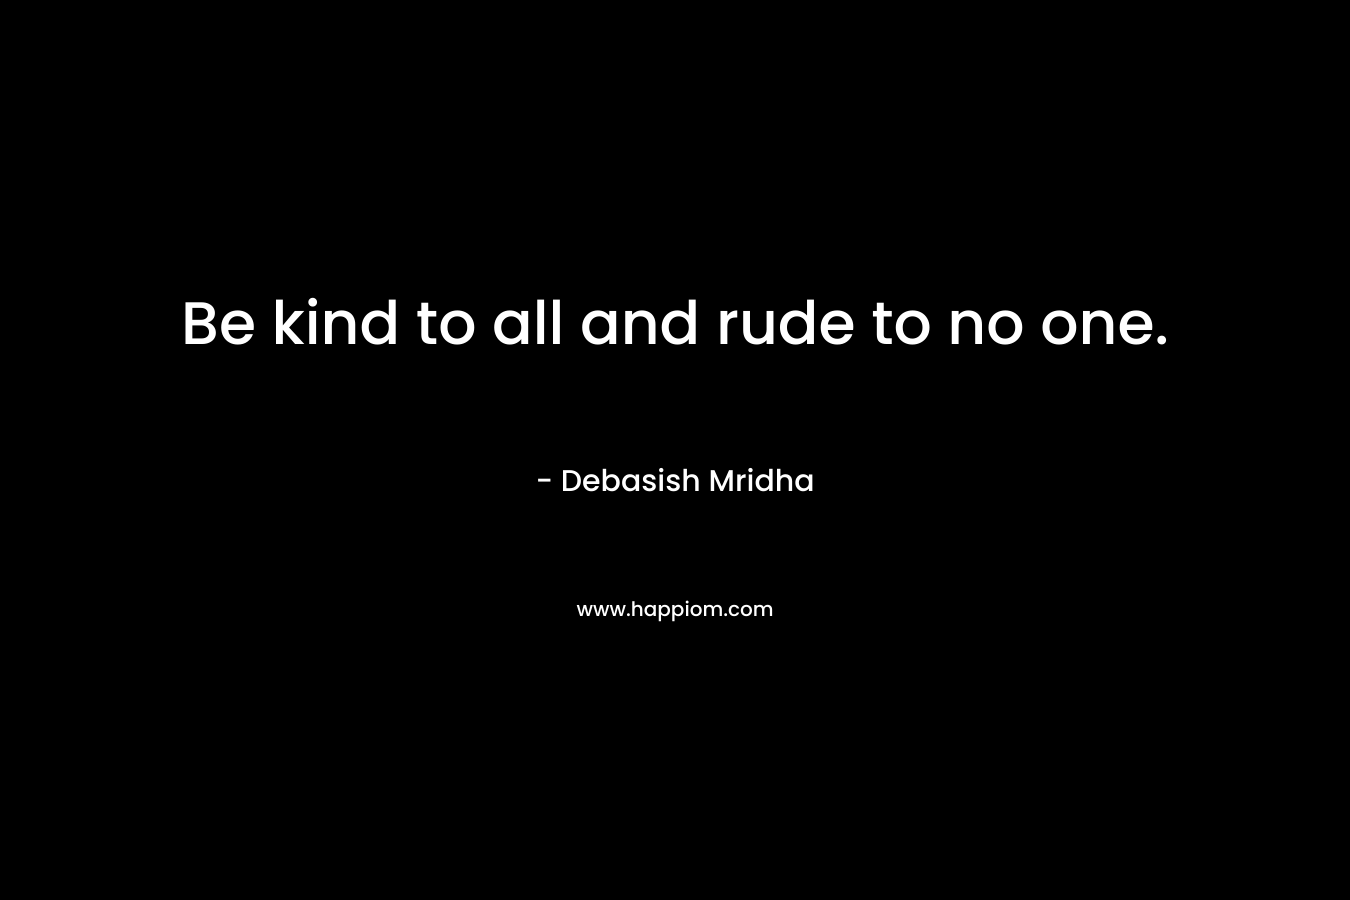 Be kind to all and rude to no one.